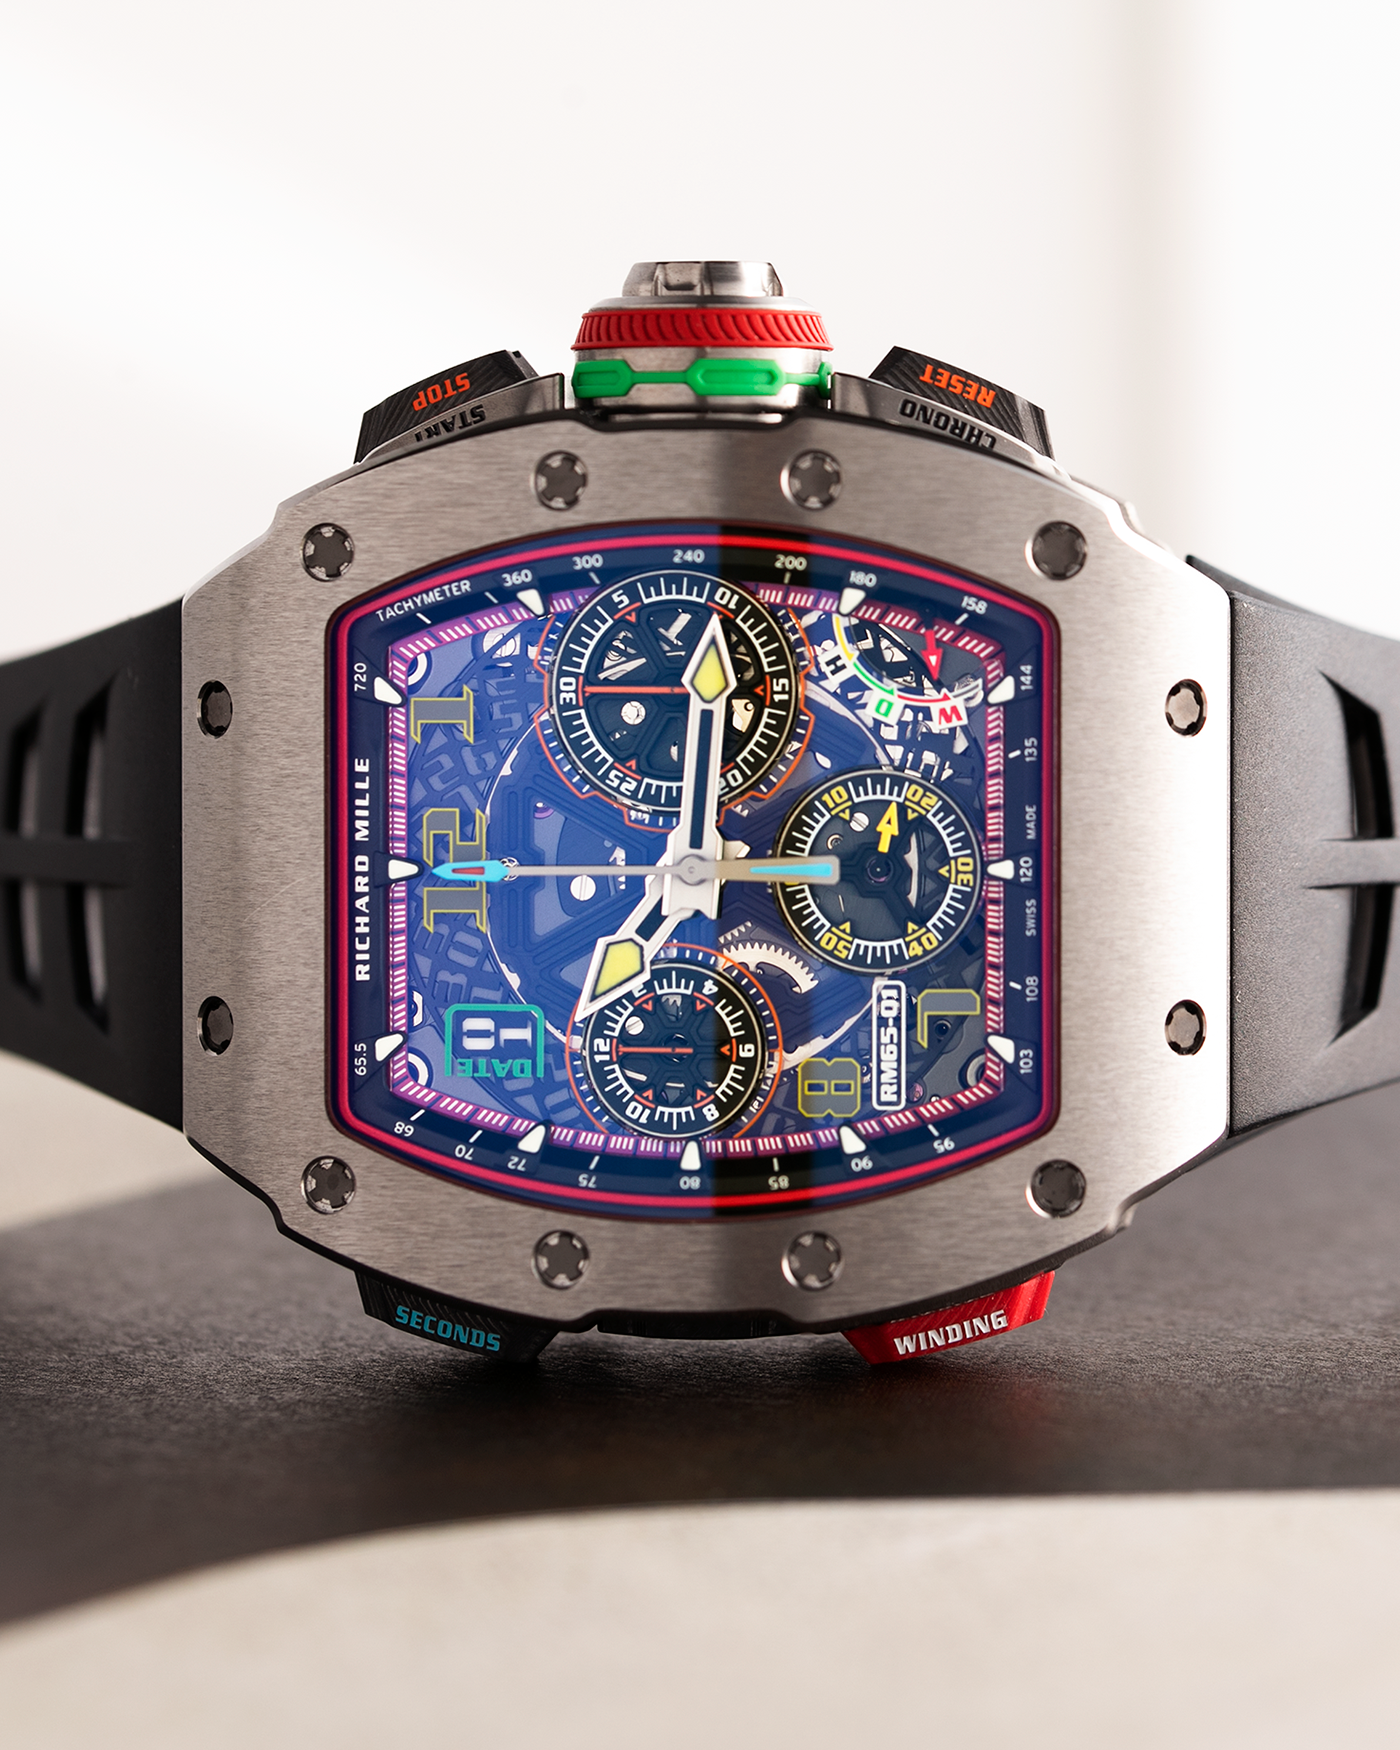 Brand: Richard Mille Year: 2022 Model: RM65-01 Material: Titanium Movement: Cal. RMAC4 Case Diameter: 44mm X 49.9mm Bracelet: Richard Mille Black Rubber Strap with Titanium Deployant Clasp and Additional Richard Mille Green Rubber Strap